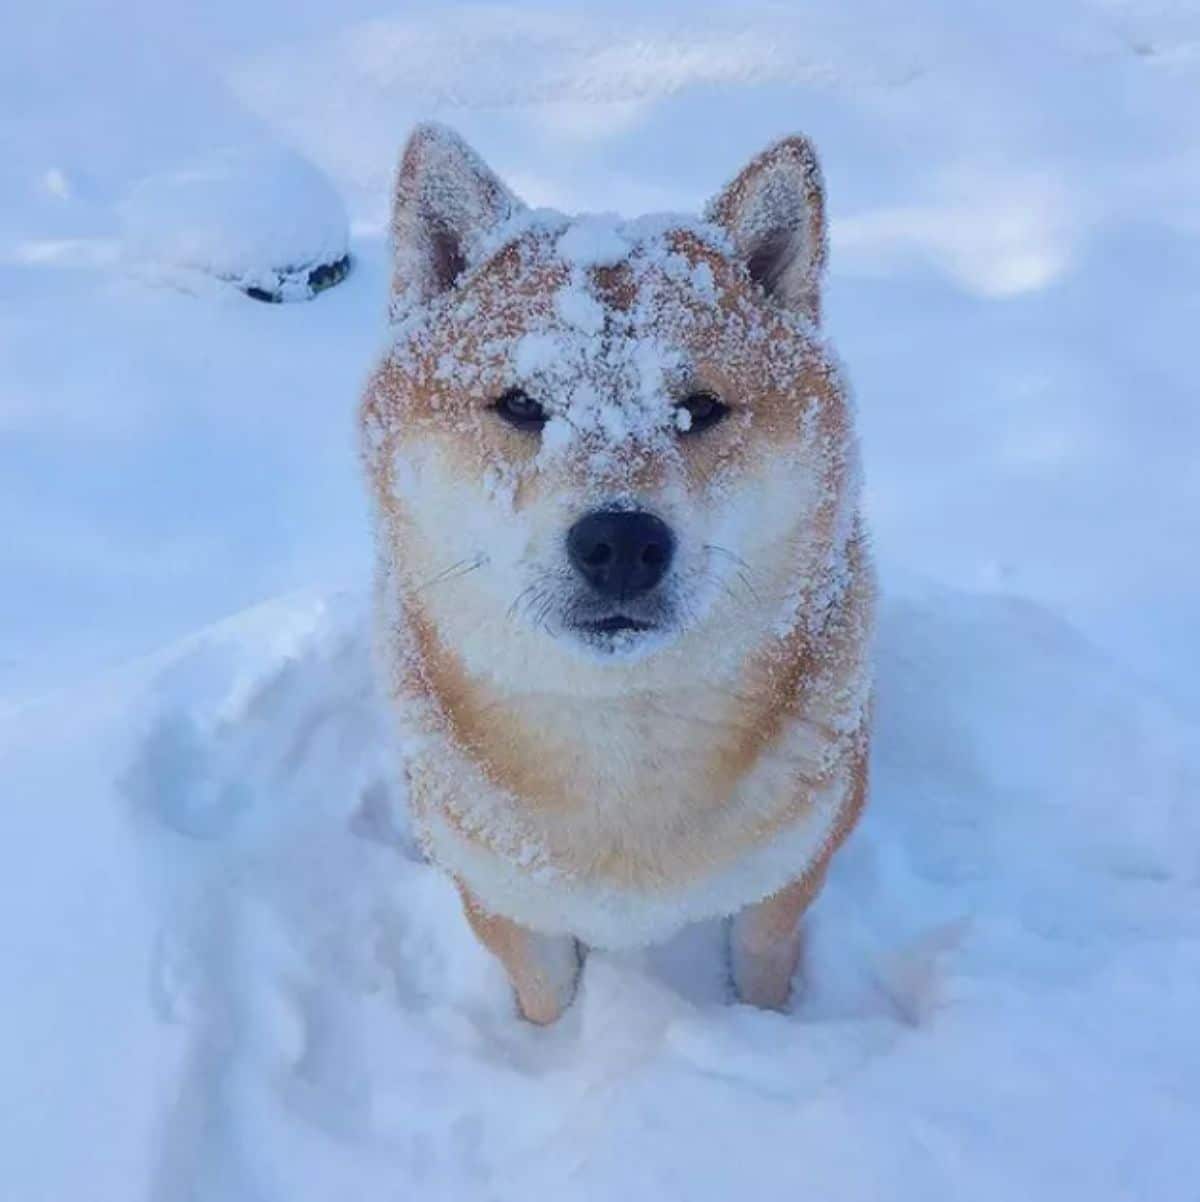 brown and white shiba inu standing on snow with snow on its face and body